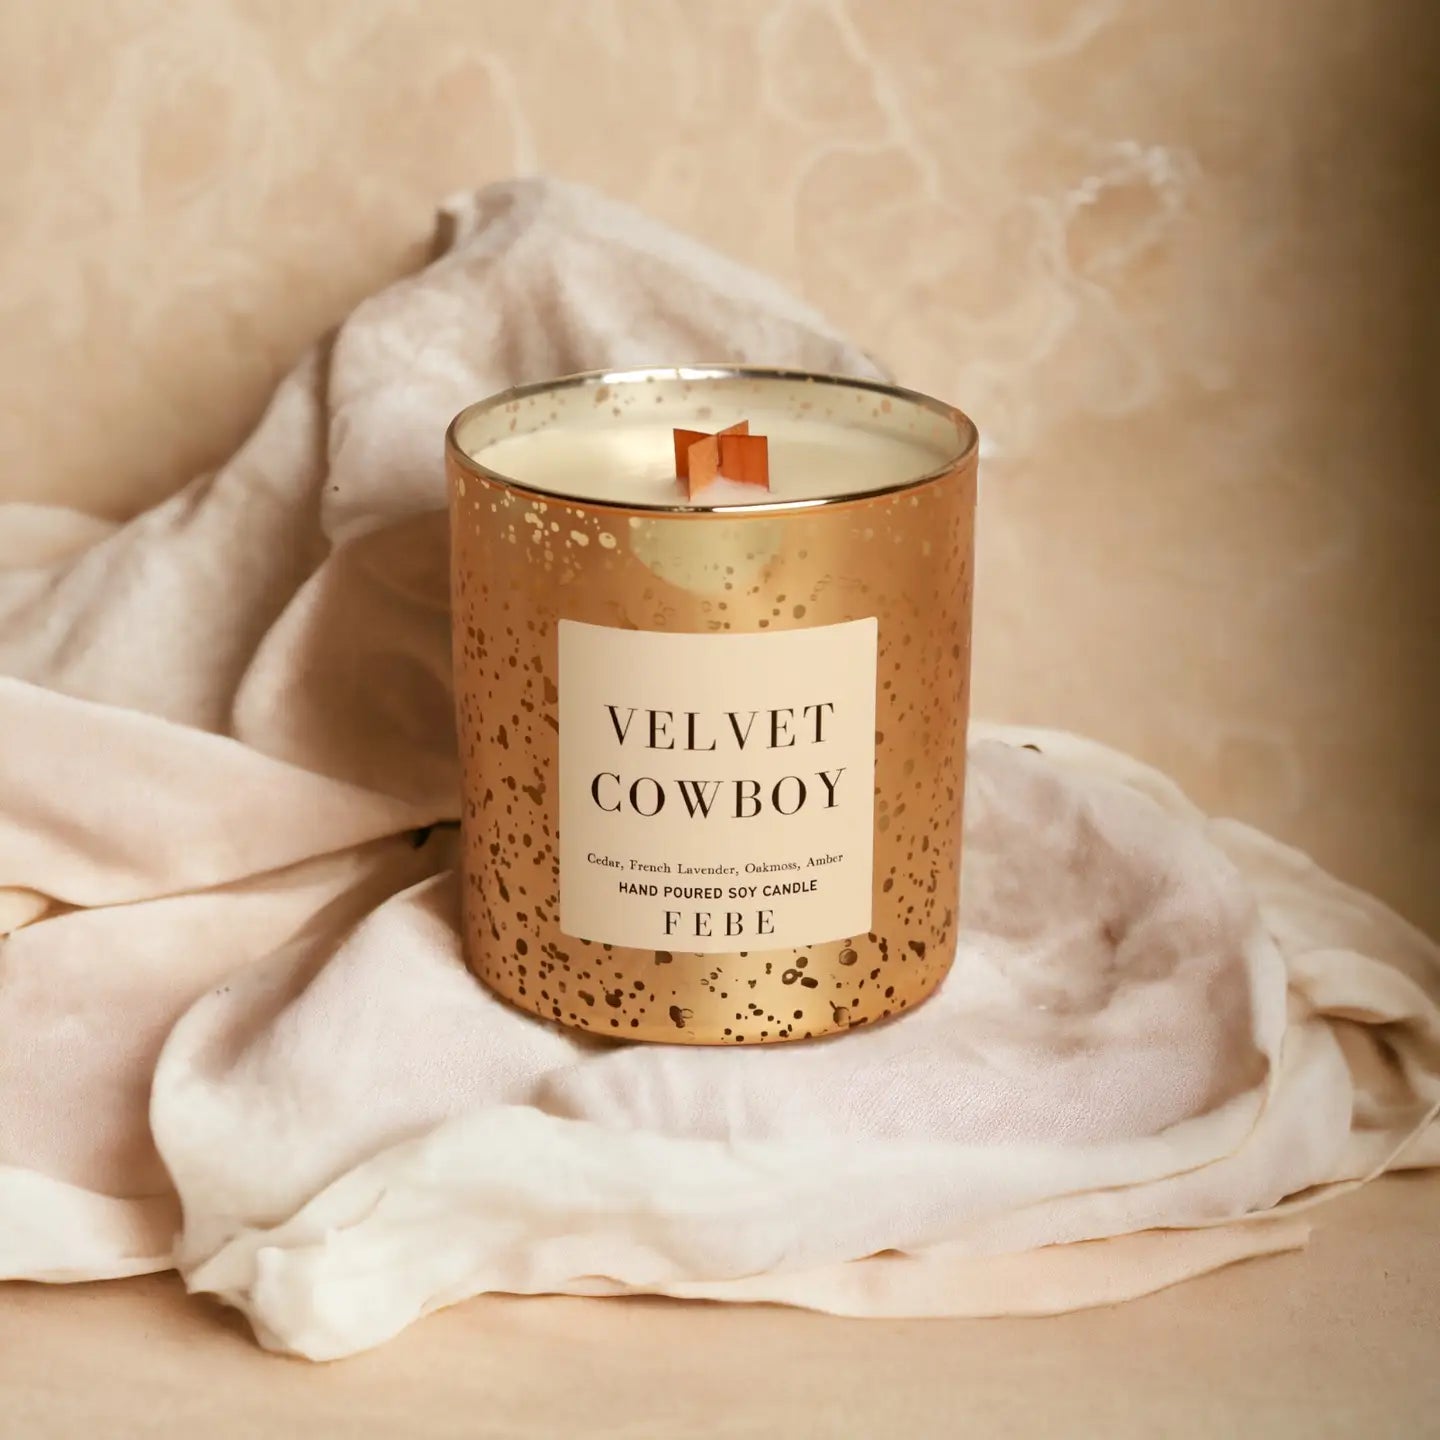 A scented candle labeled &quot;Velvet Cowboy&quot; by Faire, with a single wick, displayed on a soft, crumpled fabric against a marbled beige background. The FEBE candle&#39;s container has a speckled gold Arizona-style design.